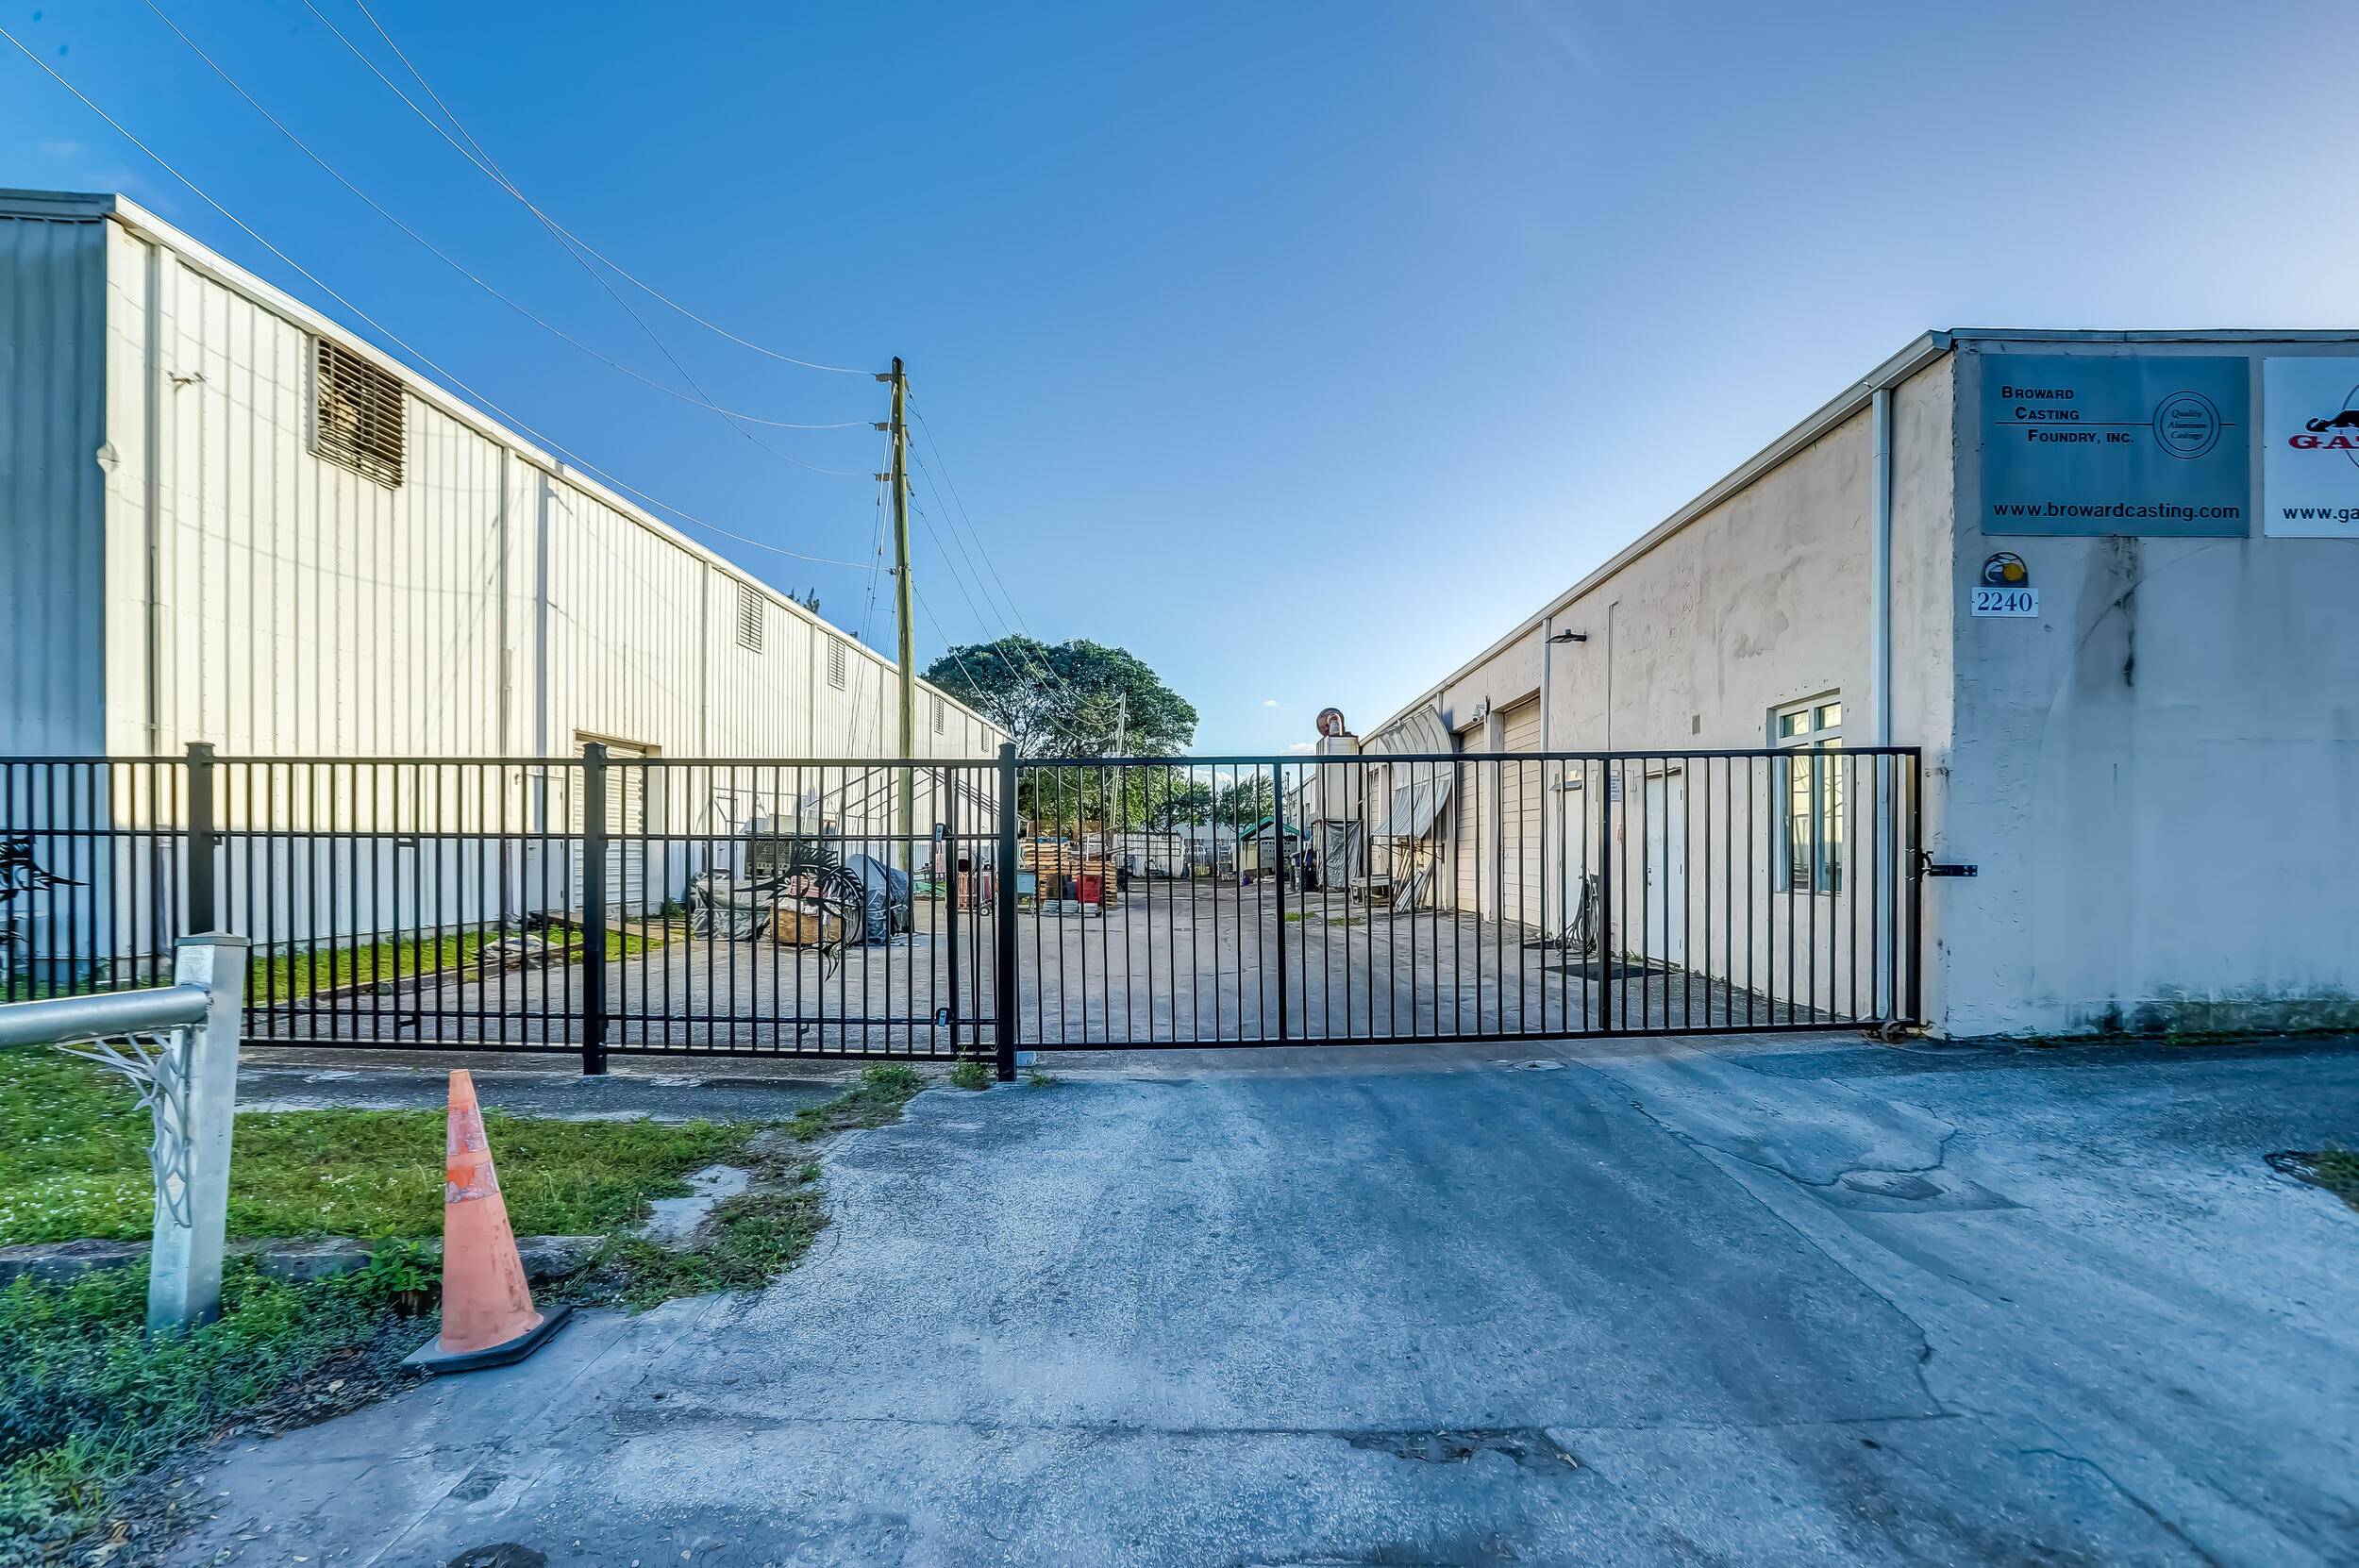 Building for sale with or without the Business The building alone is 3, 200, 000 Prime Industrial Property Near Fort Lauderdale AirportWelcome to Aluminum Casting Foundry, a well established fifty ...